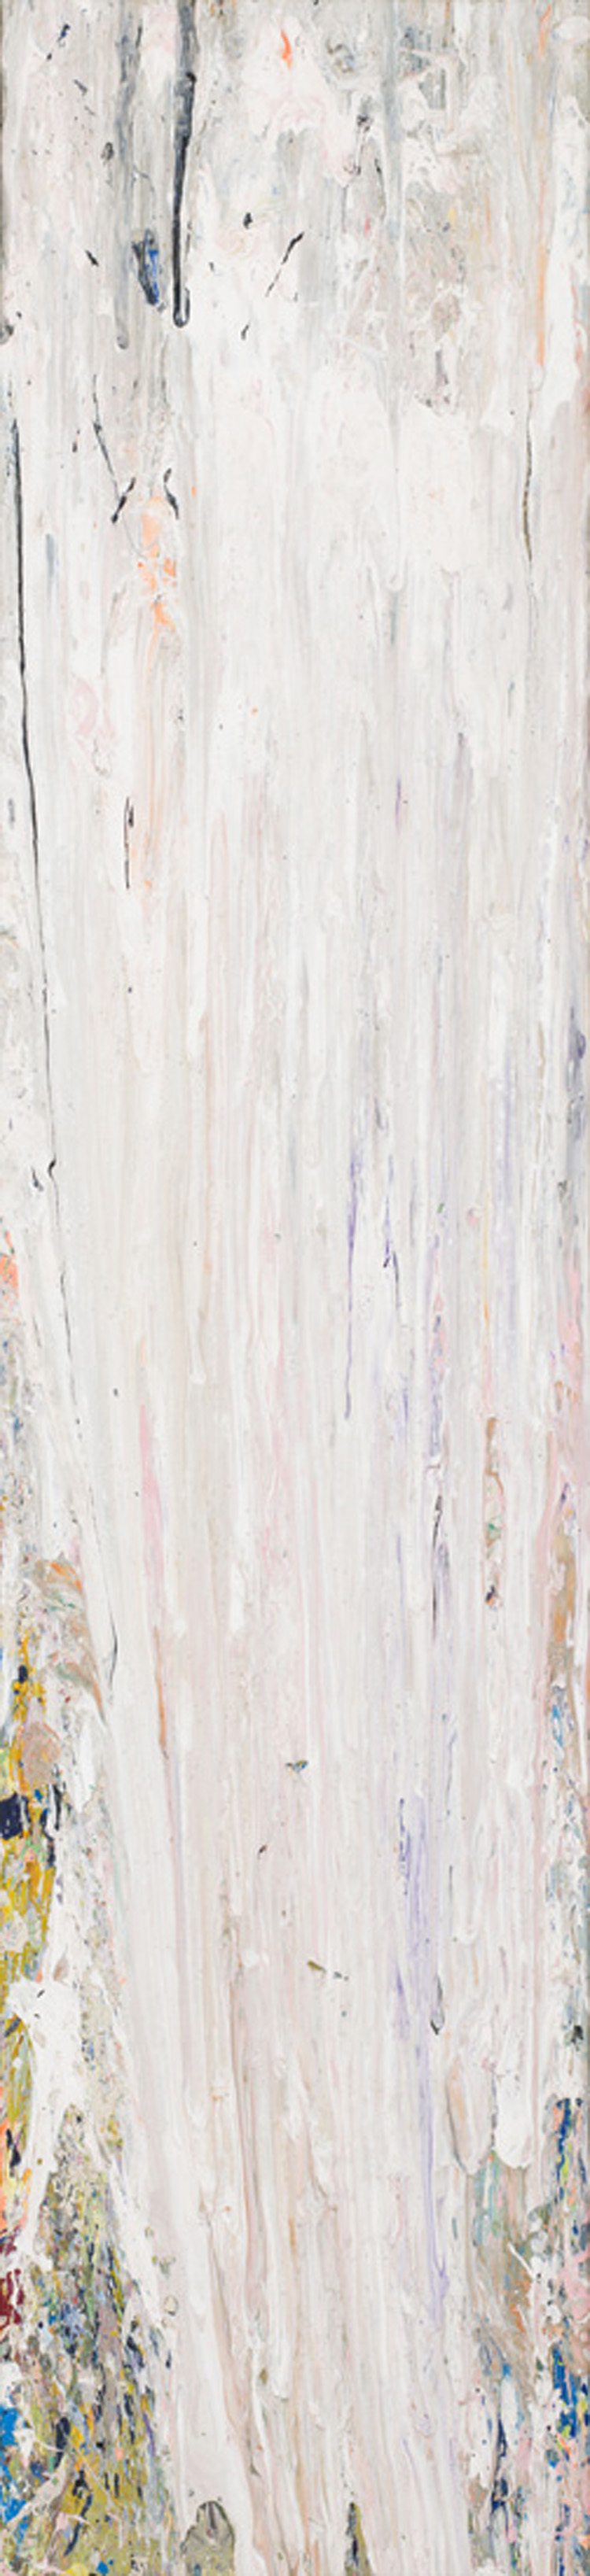 Souther by Lawrence (Larry) Poons